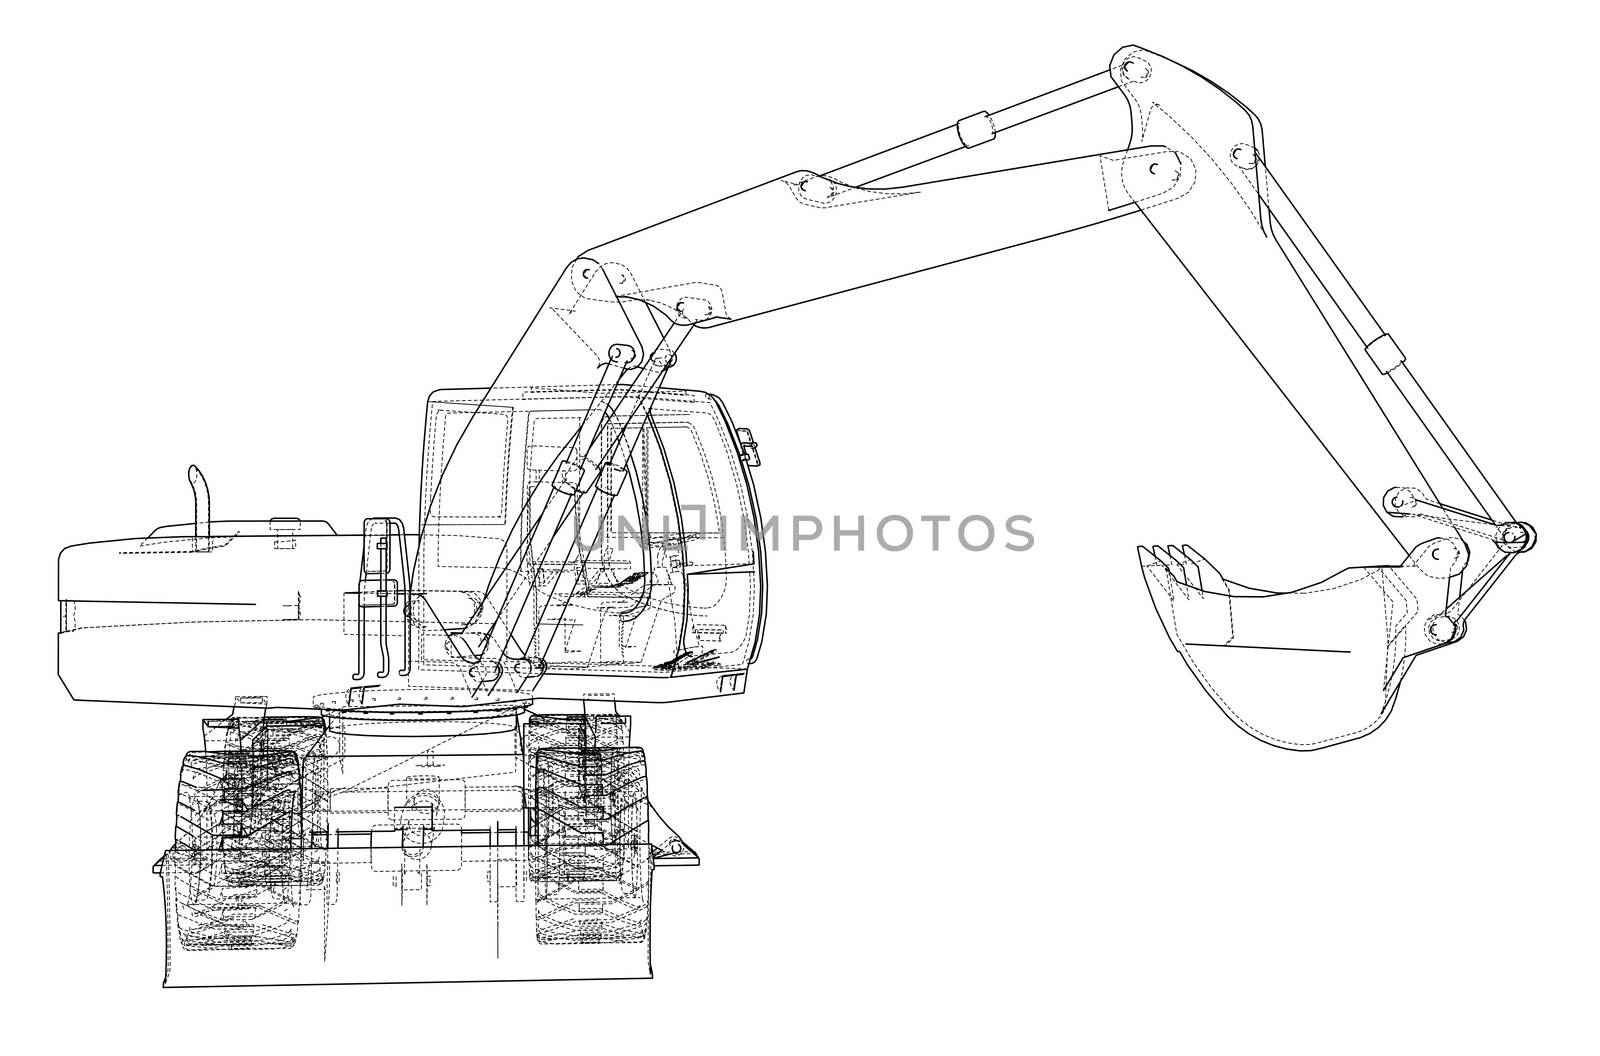 Outline of excavator isolated on background. 3d illustration